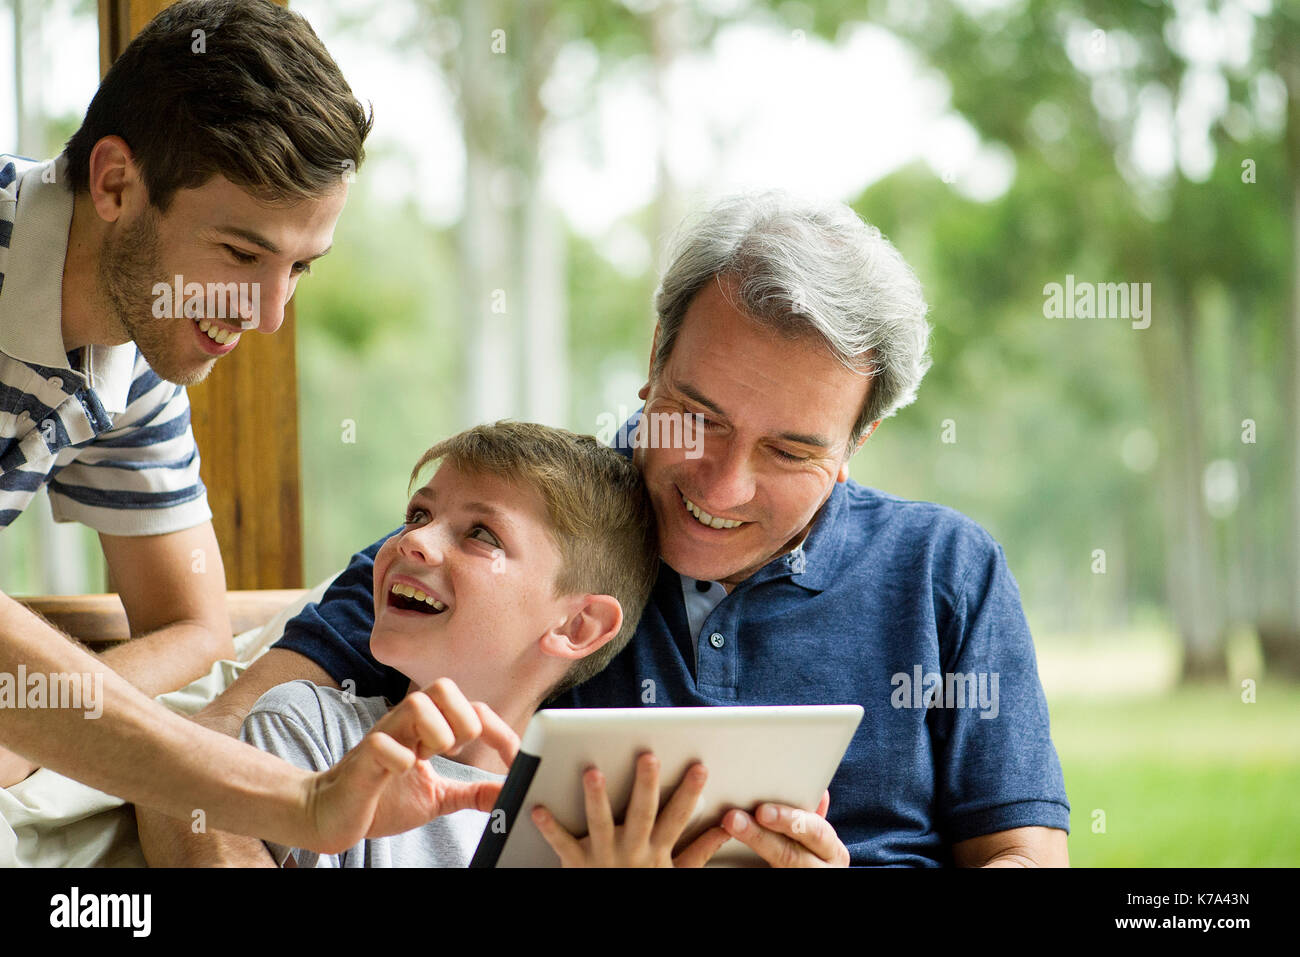 Family with child using digital tablet Stock Photo